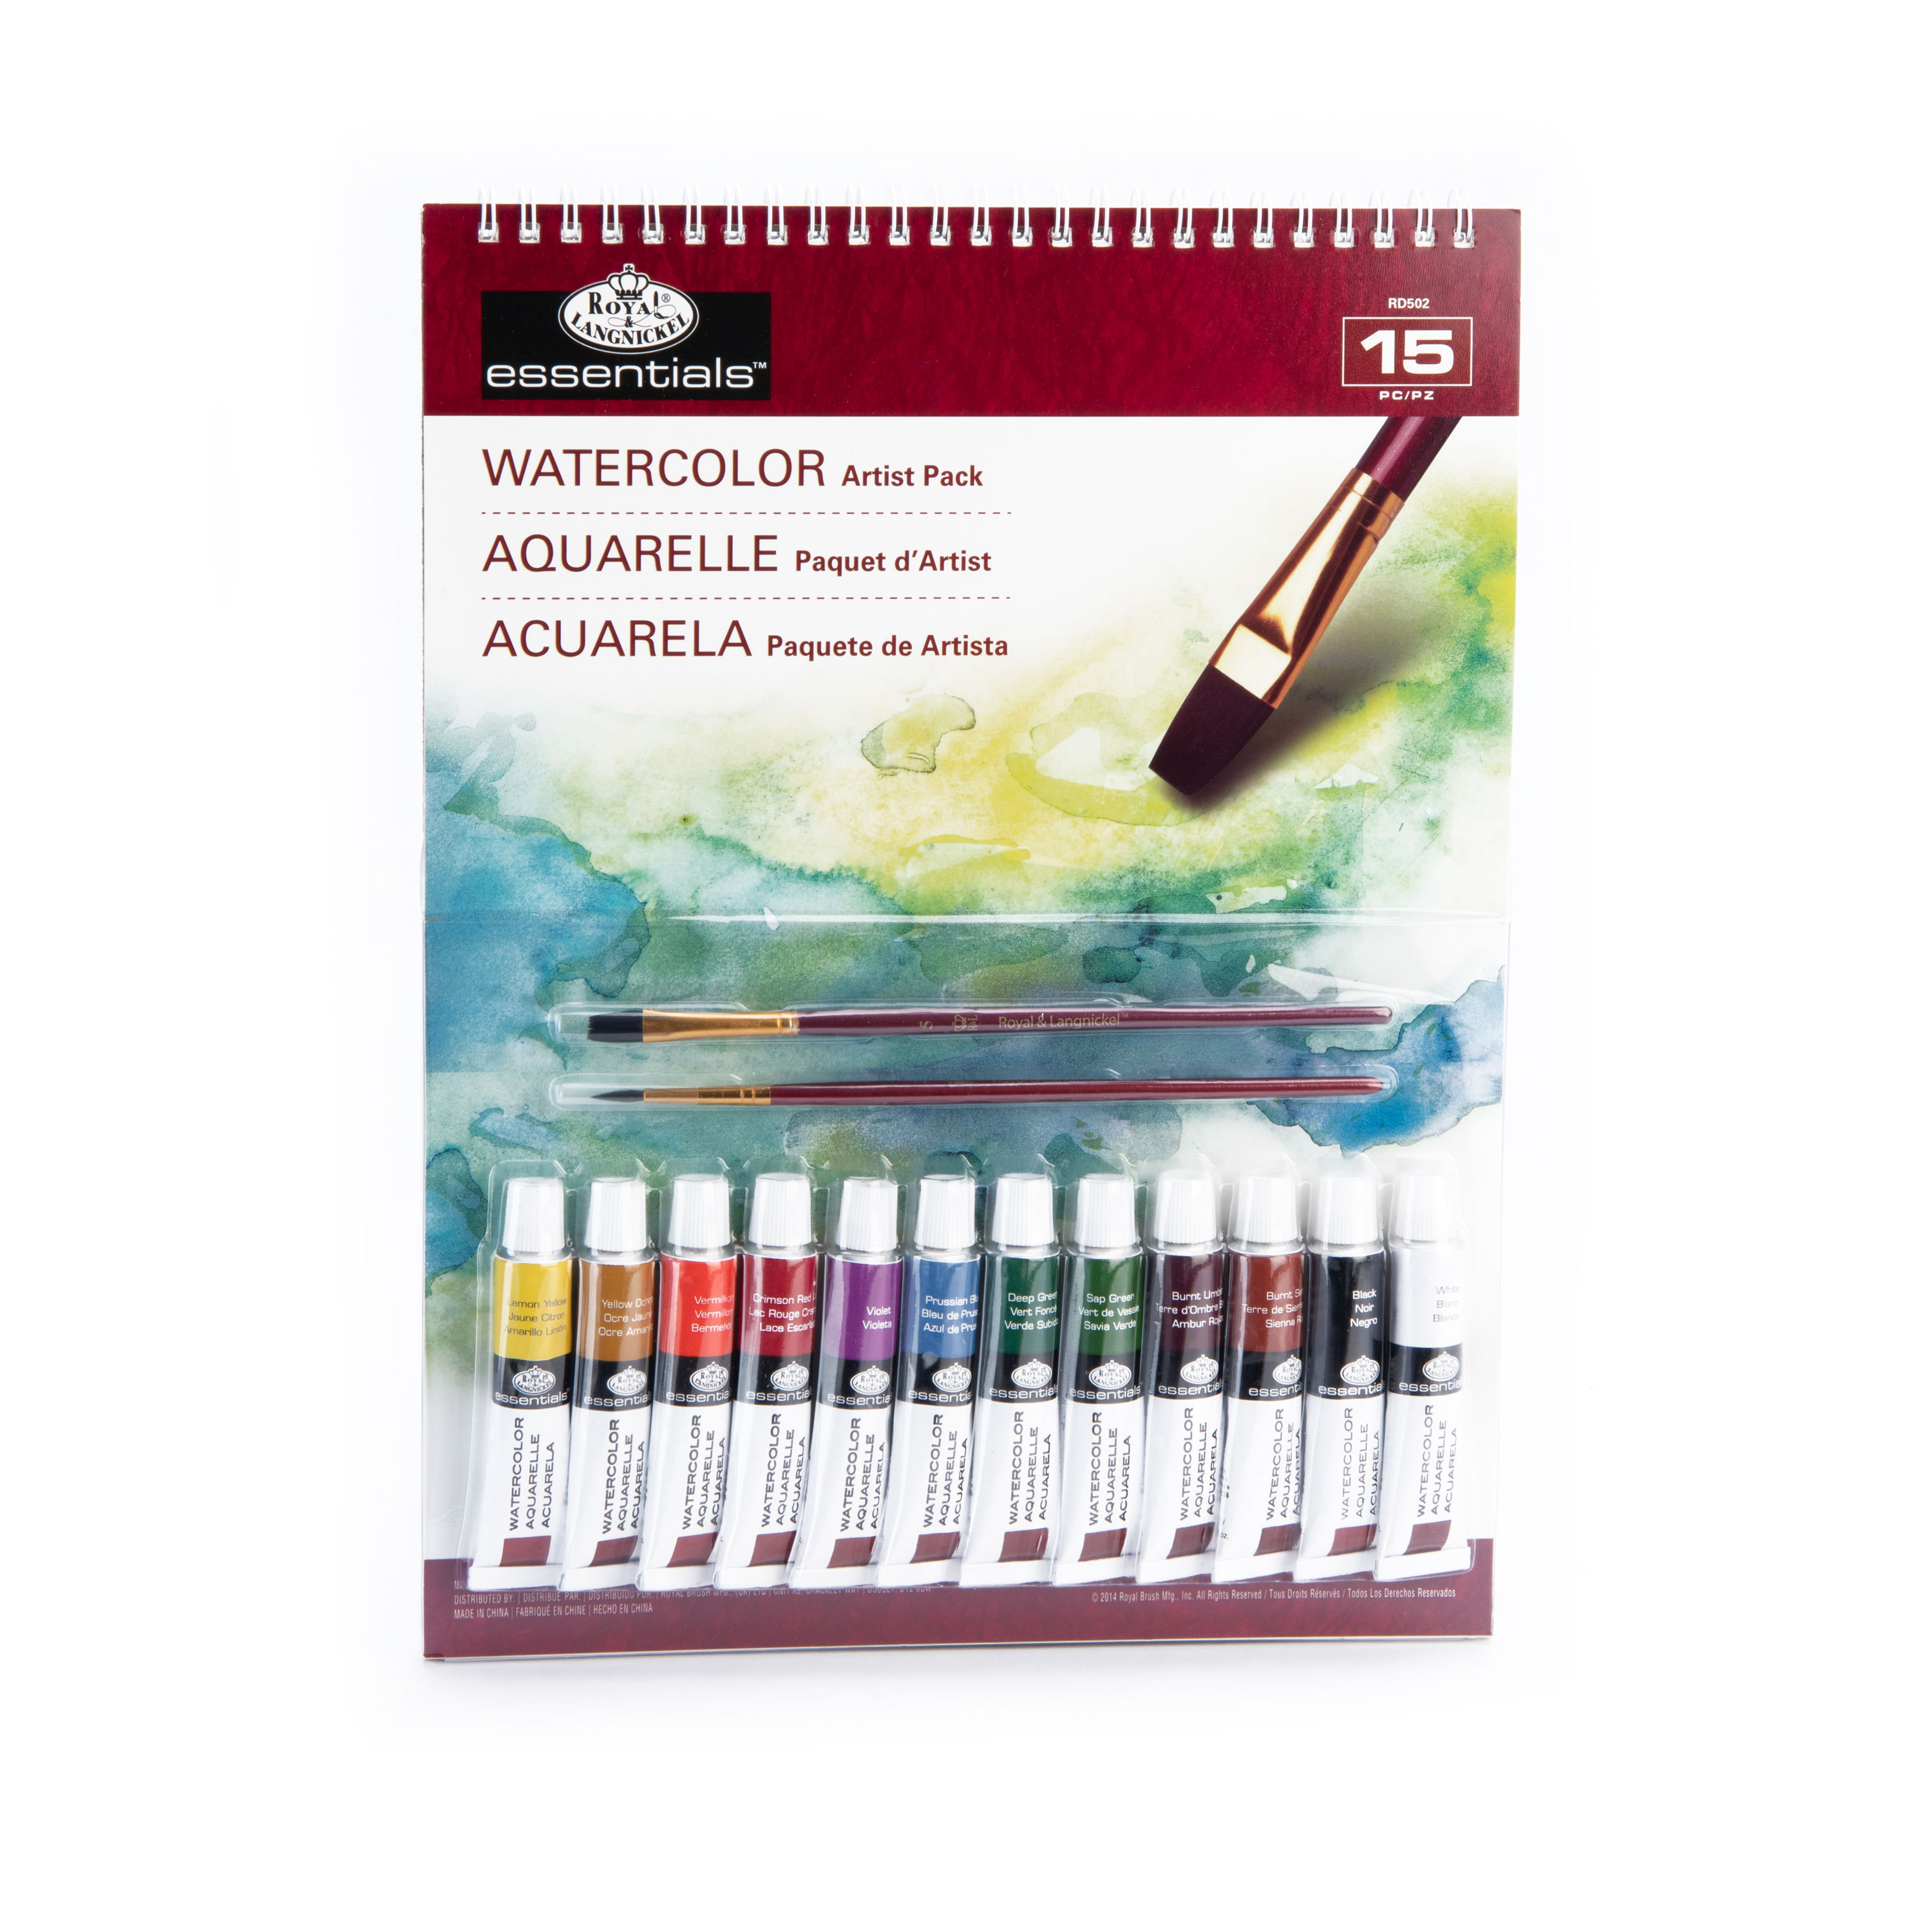 Royal & Langnickel Essentials Watercolor Painting Art Set, for Kids and Adults, 15pc - image 1 of 8